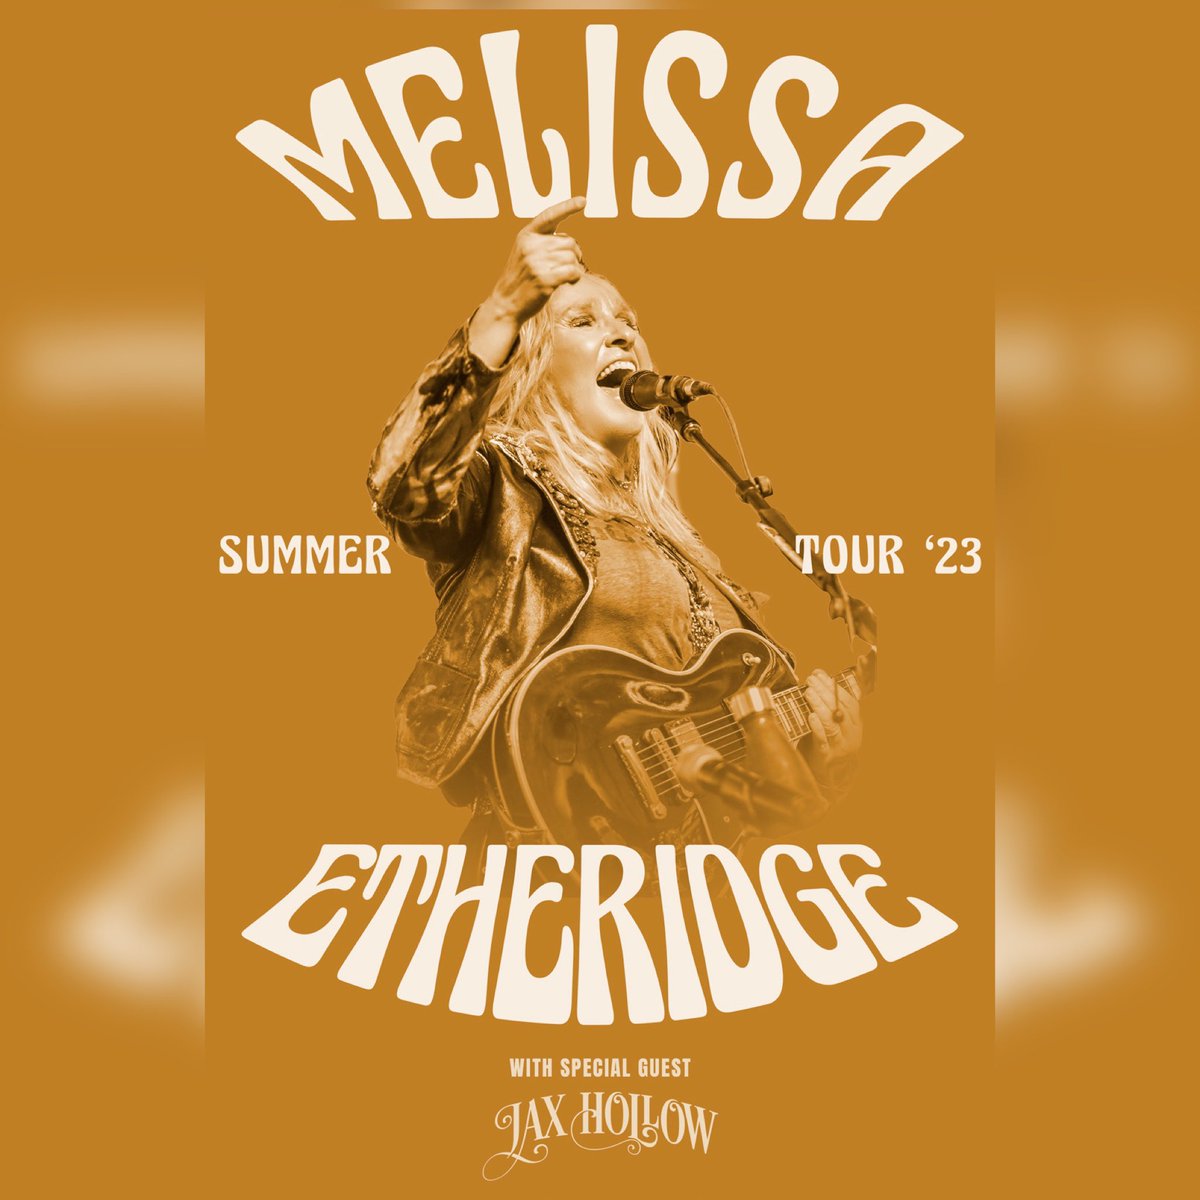 HOW IS THIS REAL LIFE?!! July 30th I will be opening for @metheridge at @theryman ! This straight out of the best dream of my life. No one wake me up! Thank you to AnR and all my supporters, tix on sale now! #jaxhollow #melissaetheridge #ryman #rymanauditorium #nashville